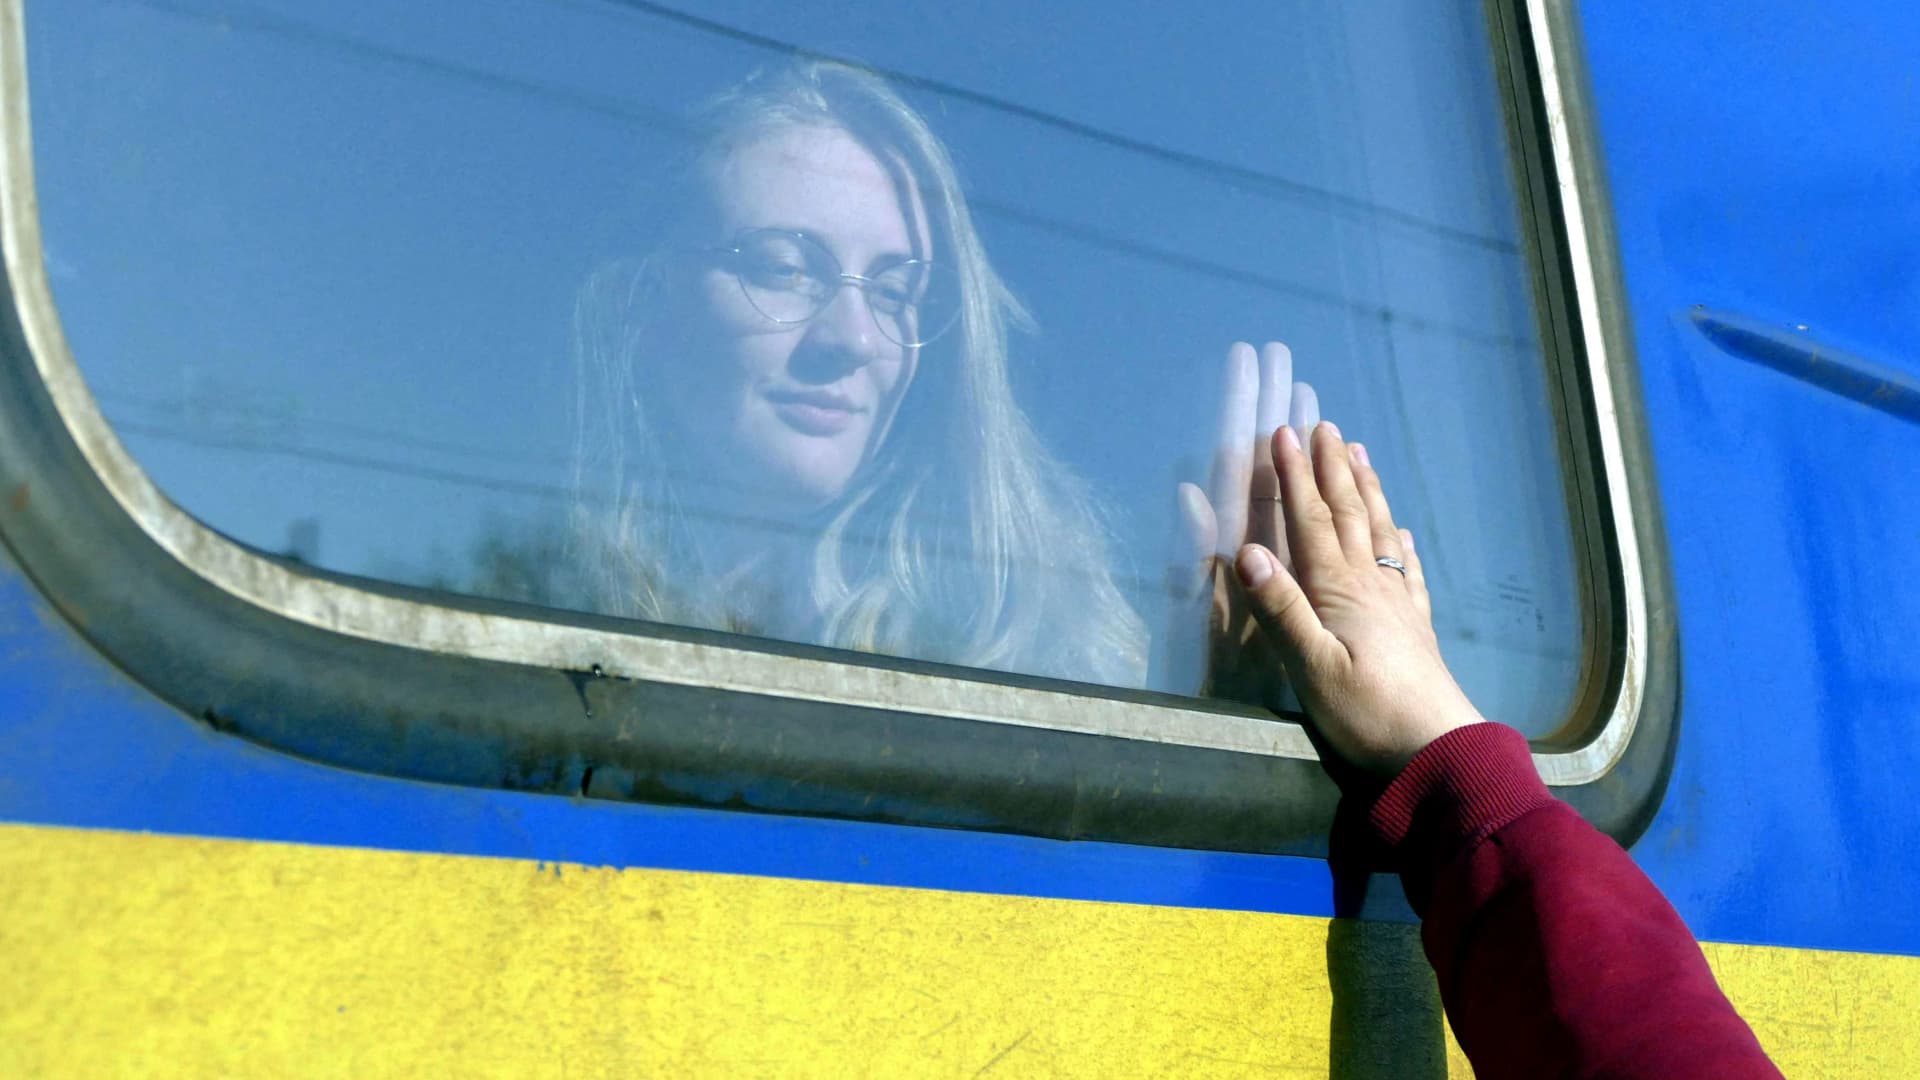 A woman says goodbye to her relative aboard a train travelling to Przemysl, Poland, amid Russia's invasion of Ukraine, in Odesa, Ukraine, April 25, 2022.